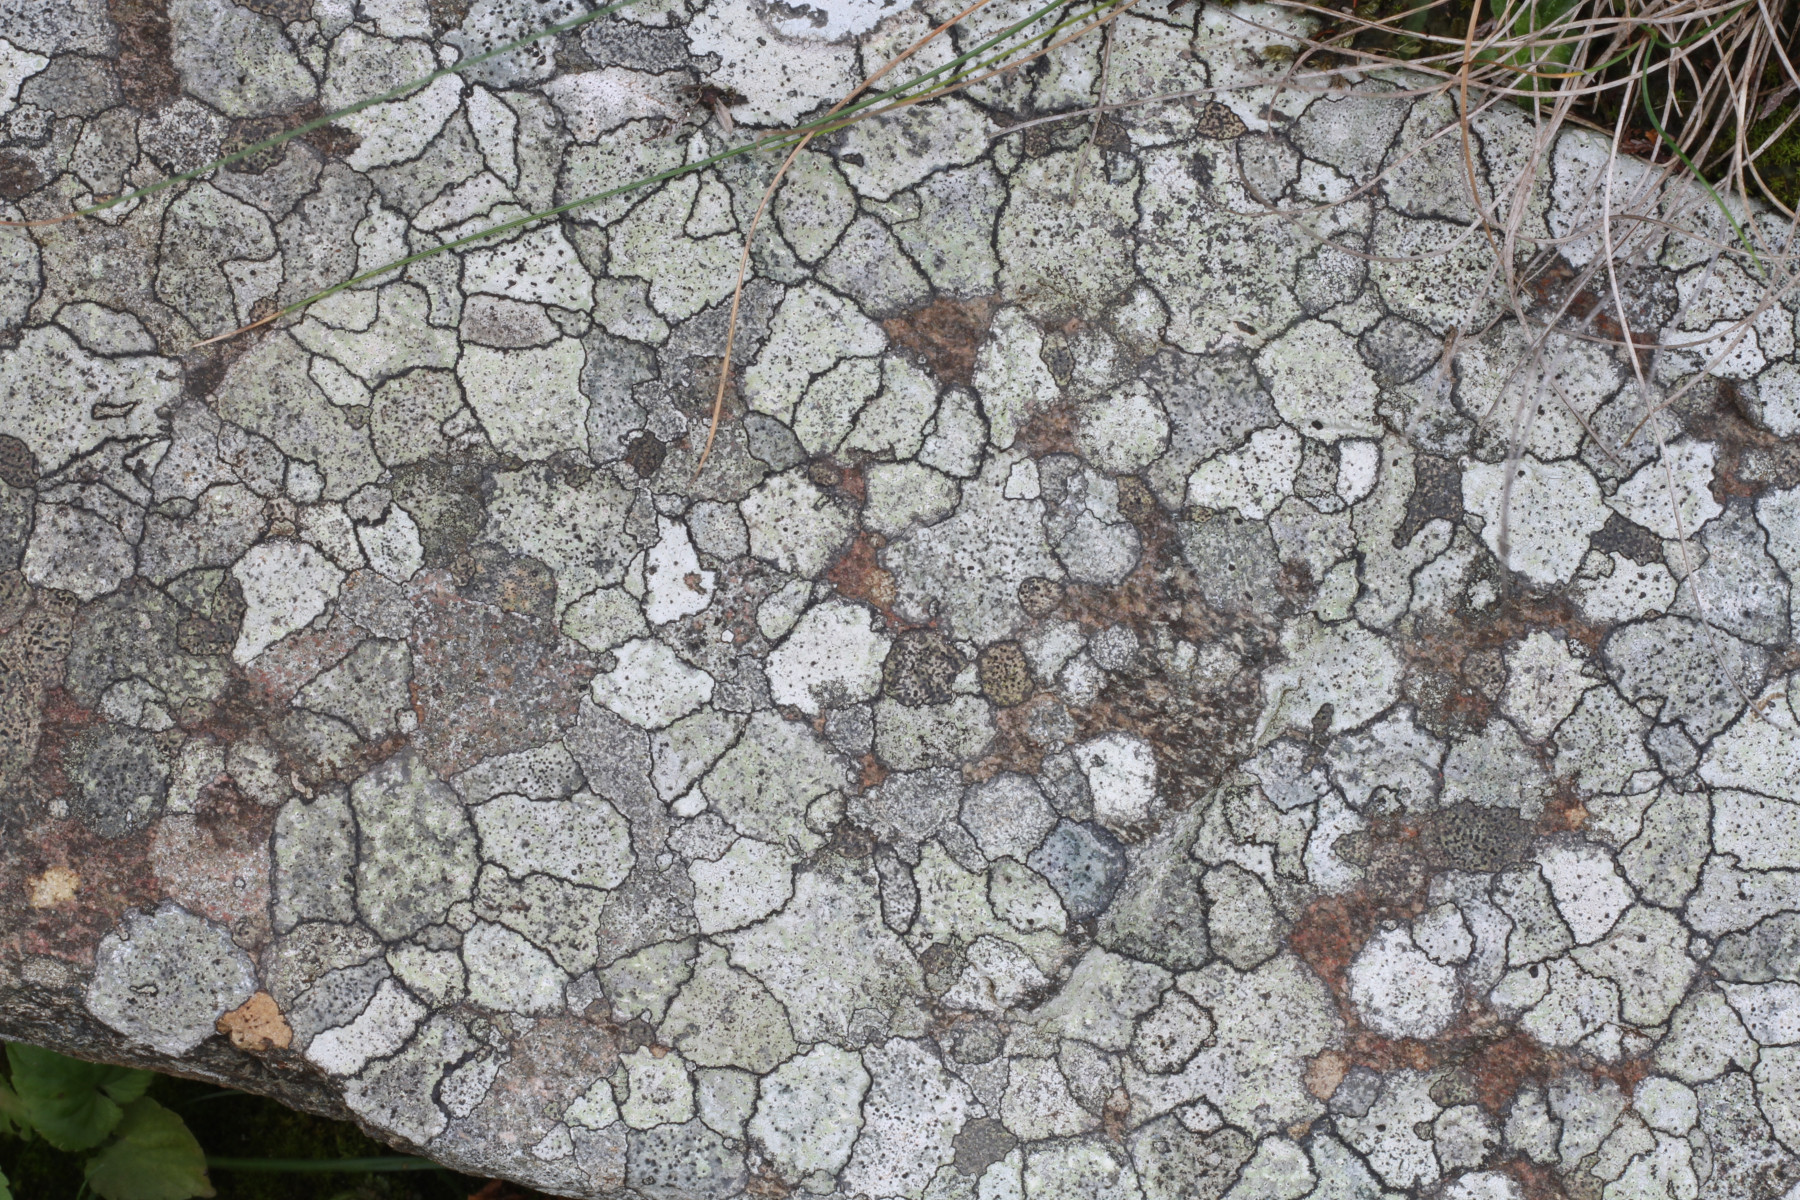 Photograph of map lichen on  a rock